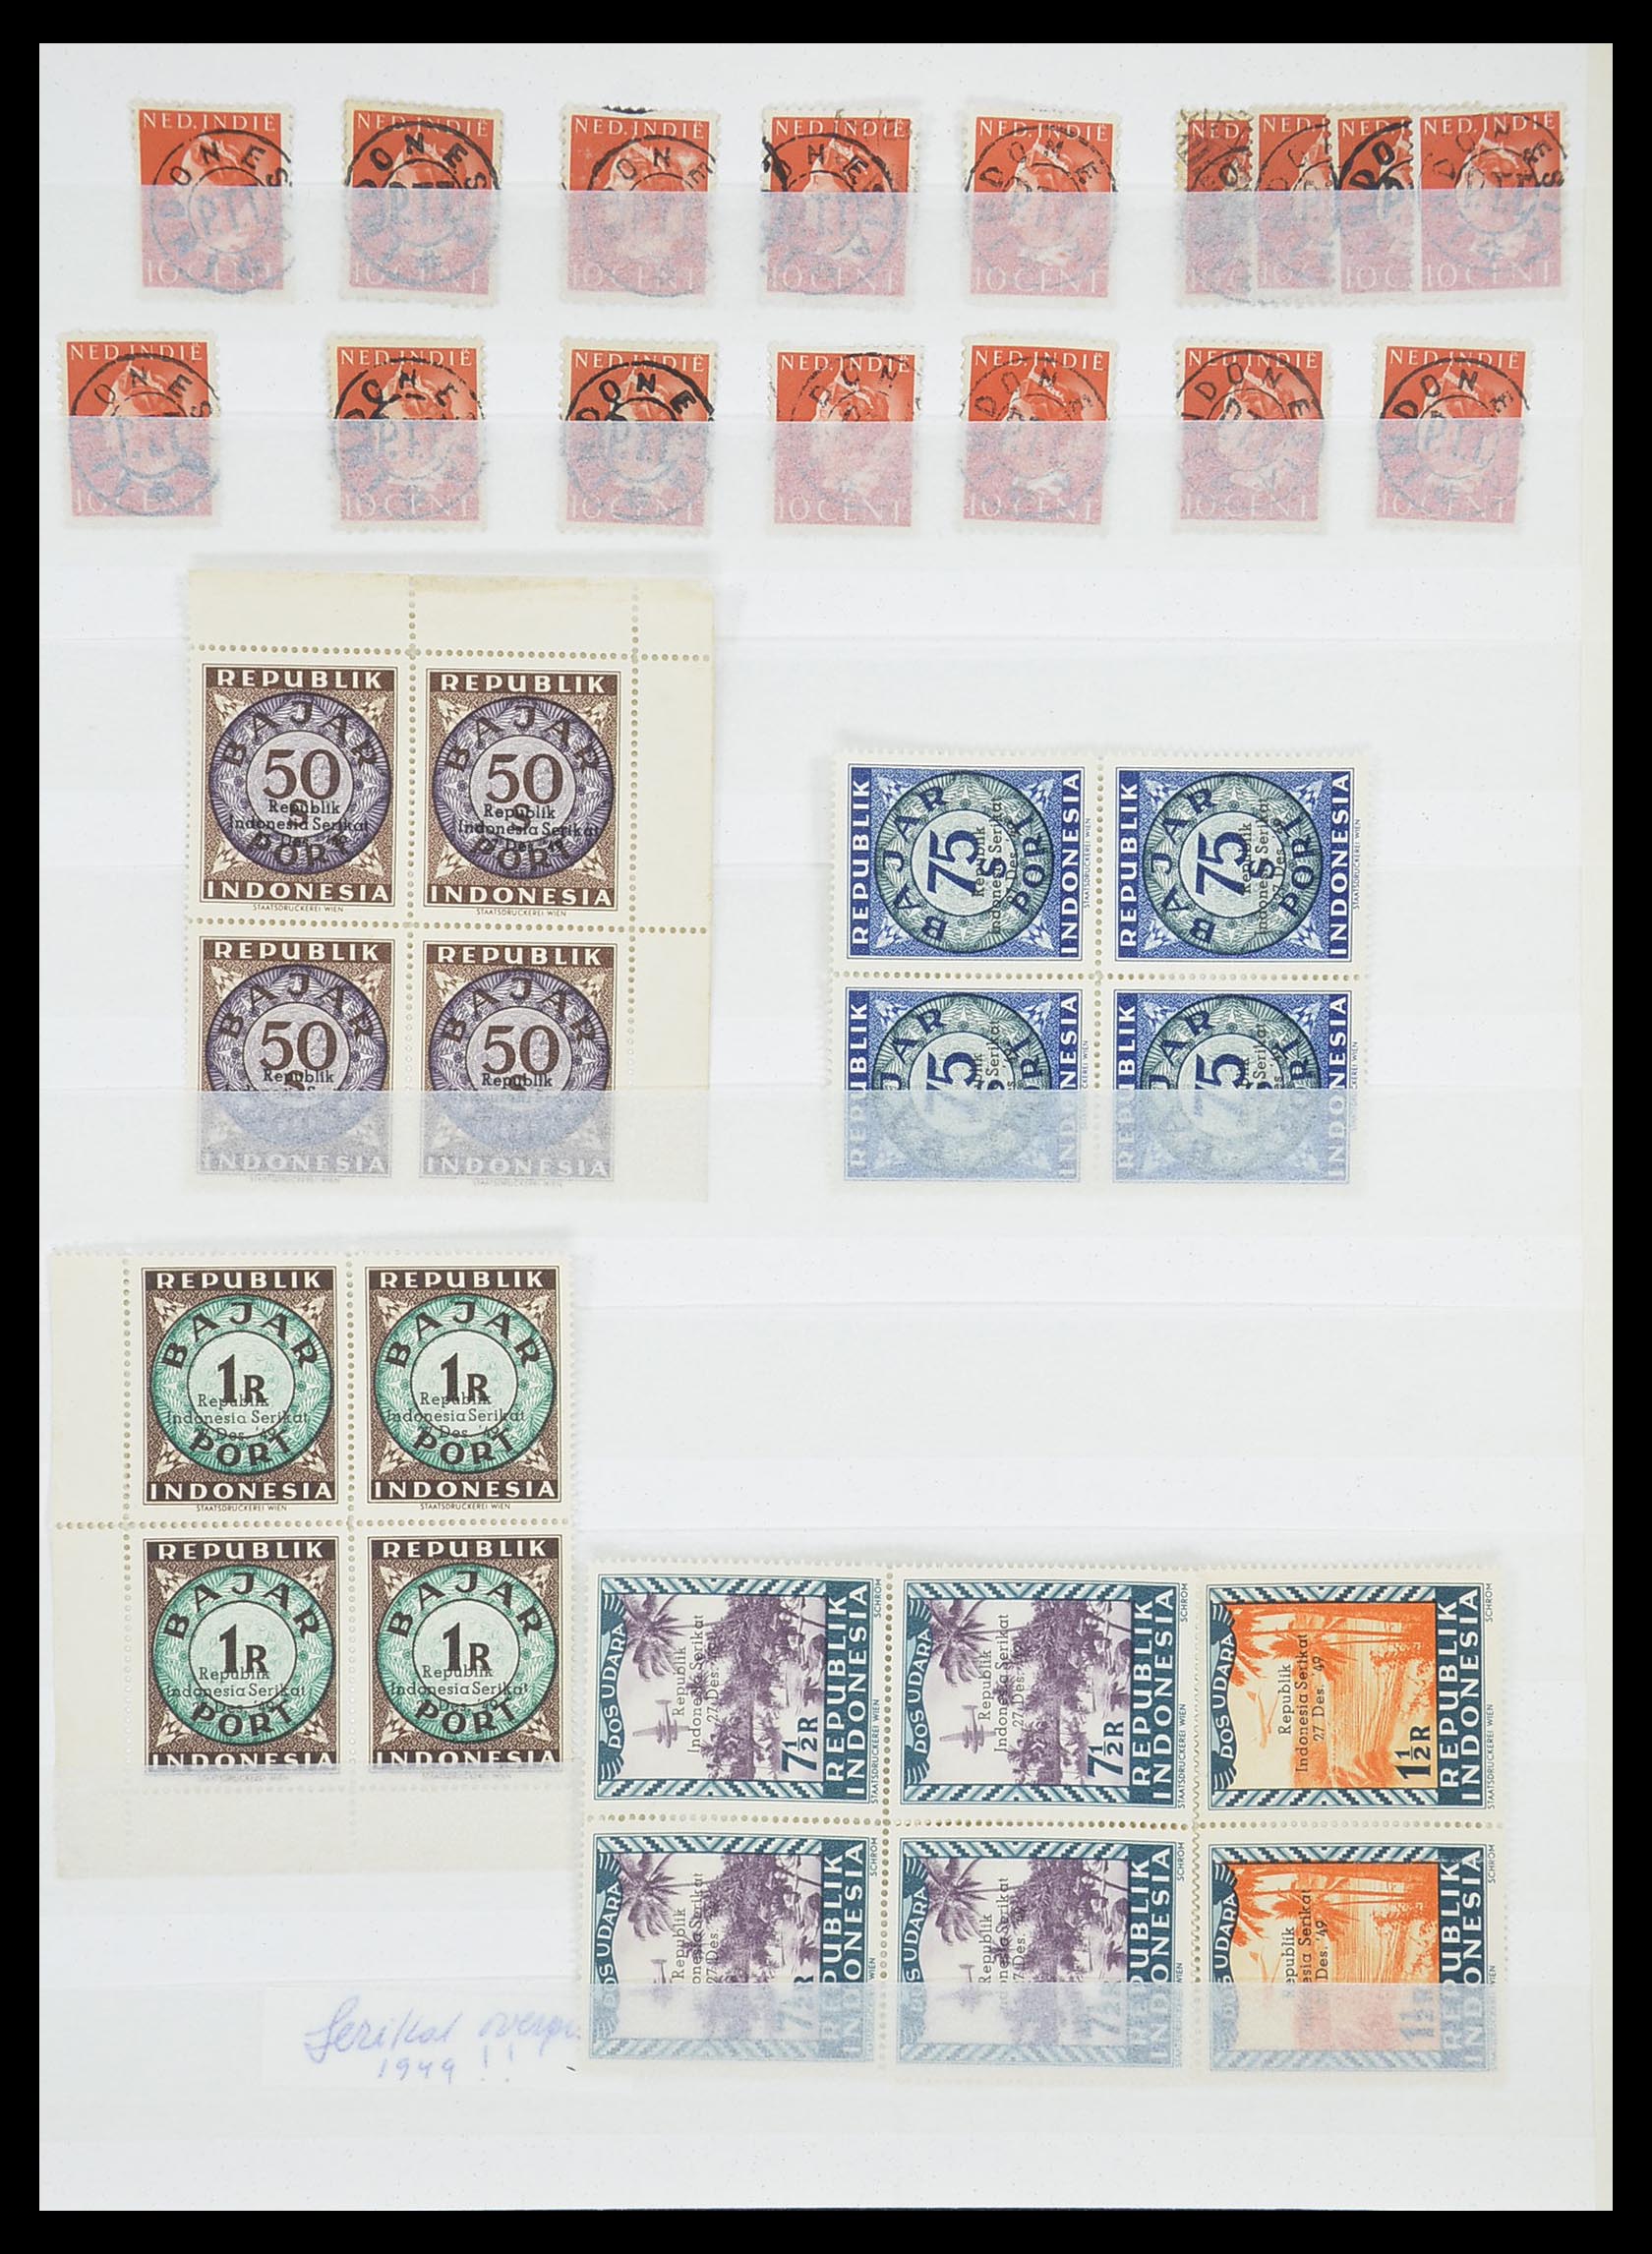 33489 023 - Stamp collection 33489 Japanese occupation Dutch east Indies and interim